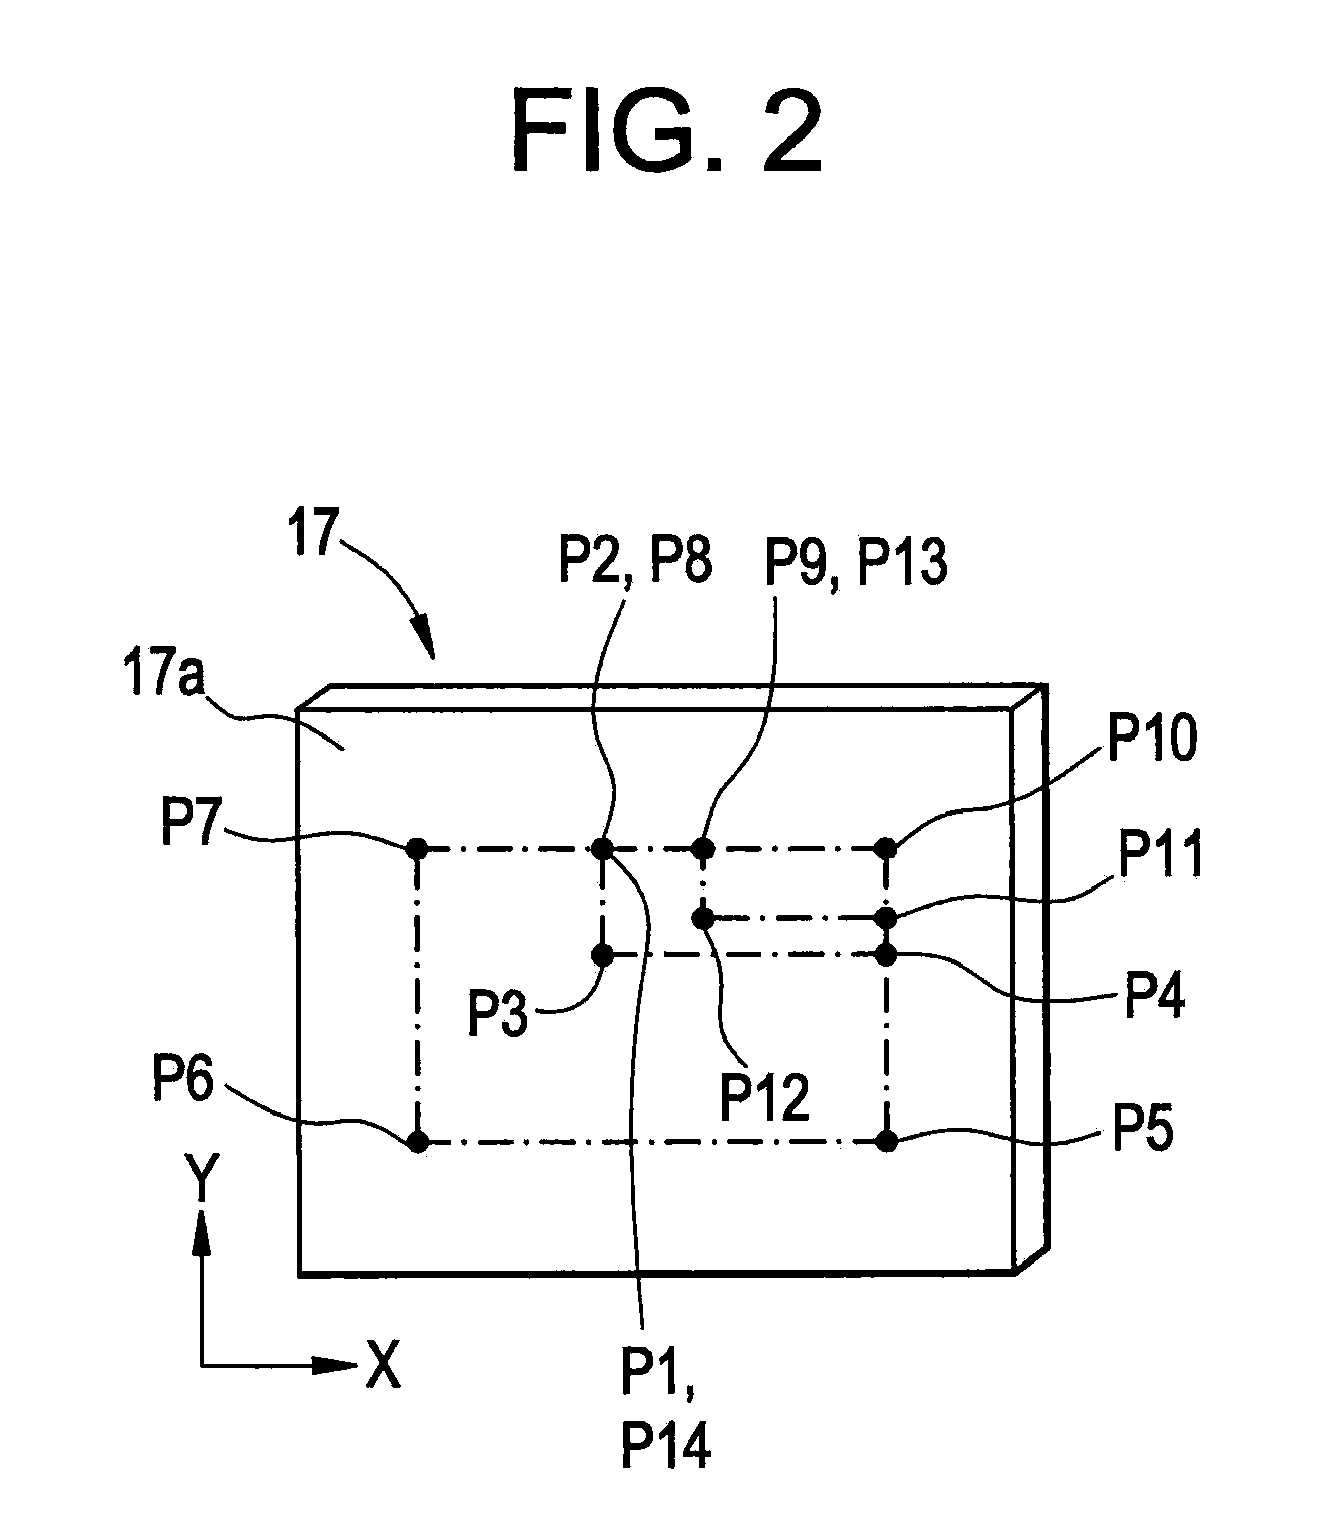 Method for creating drive pattern for galvano-scanner system